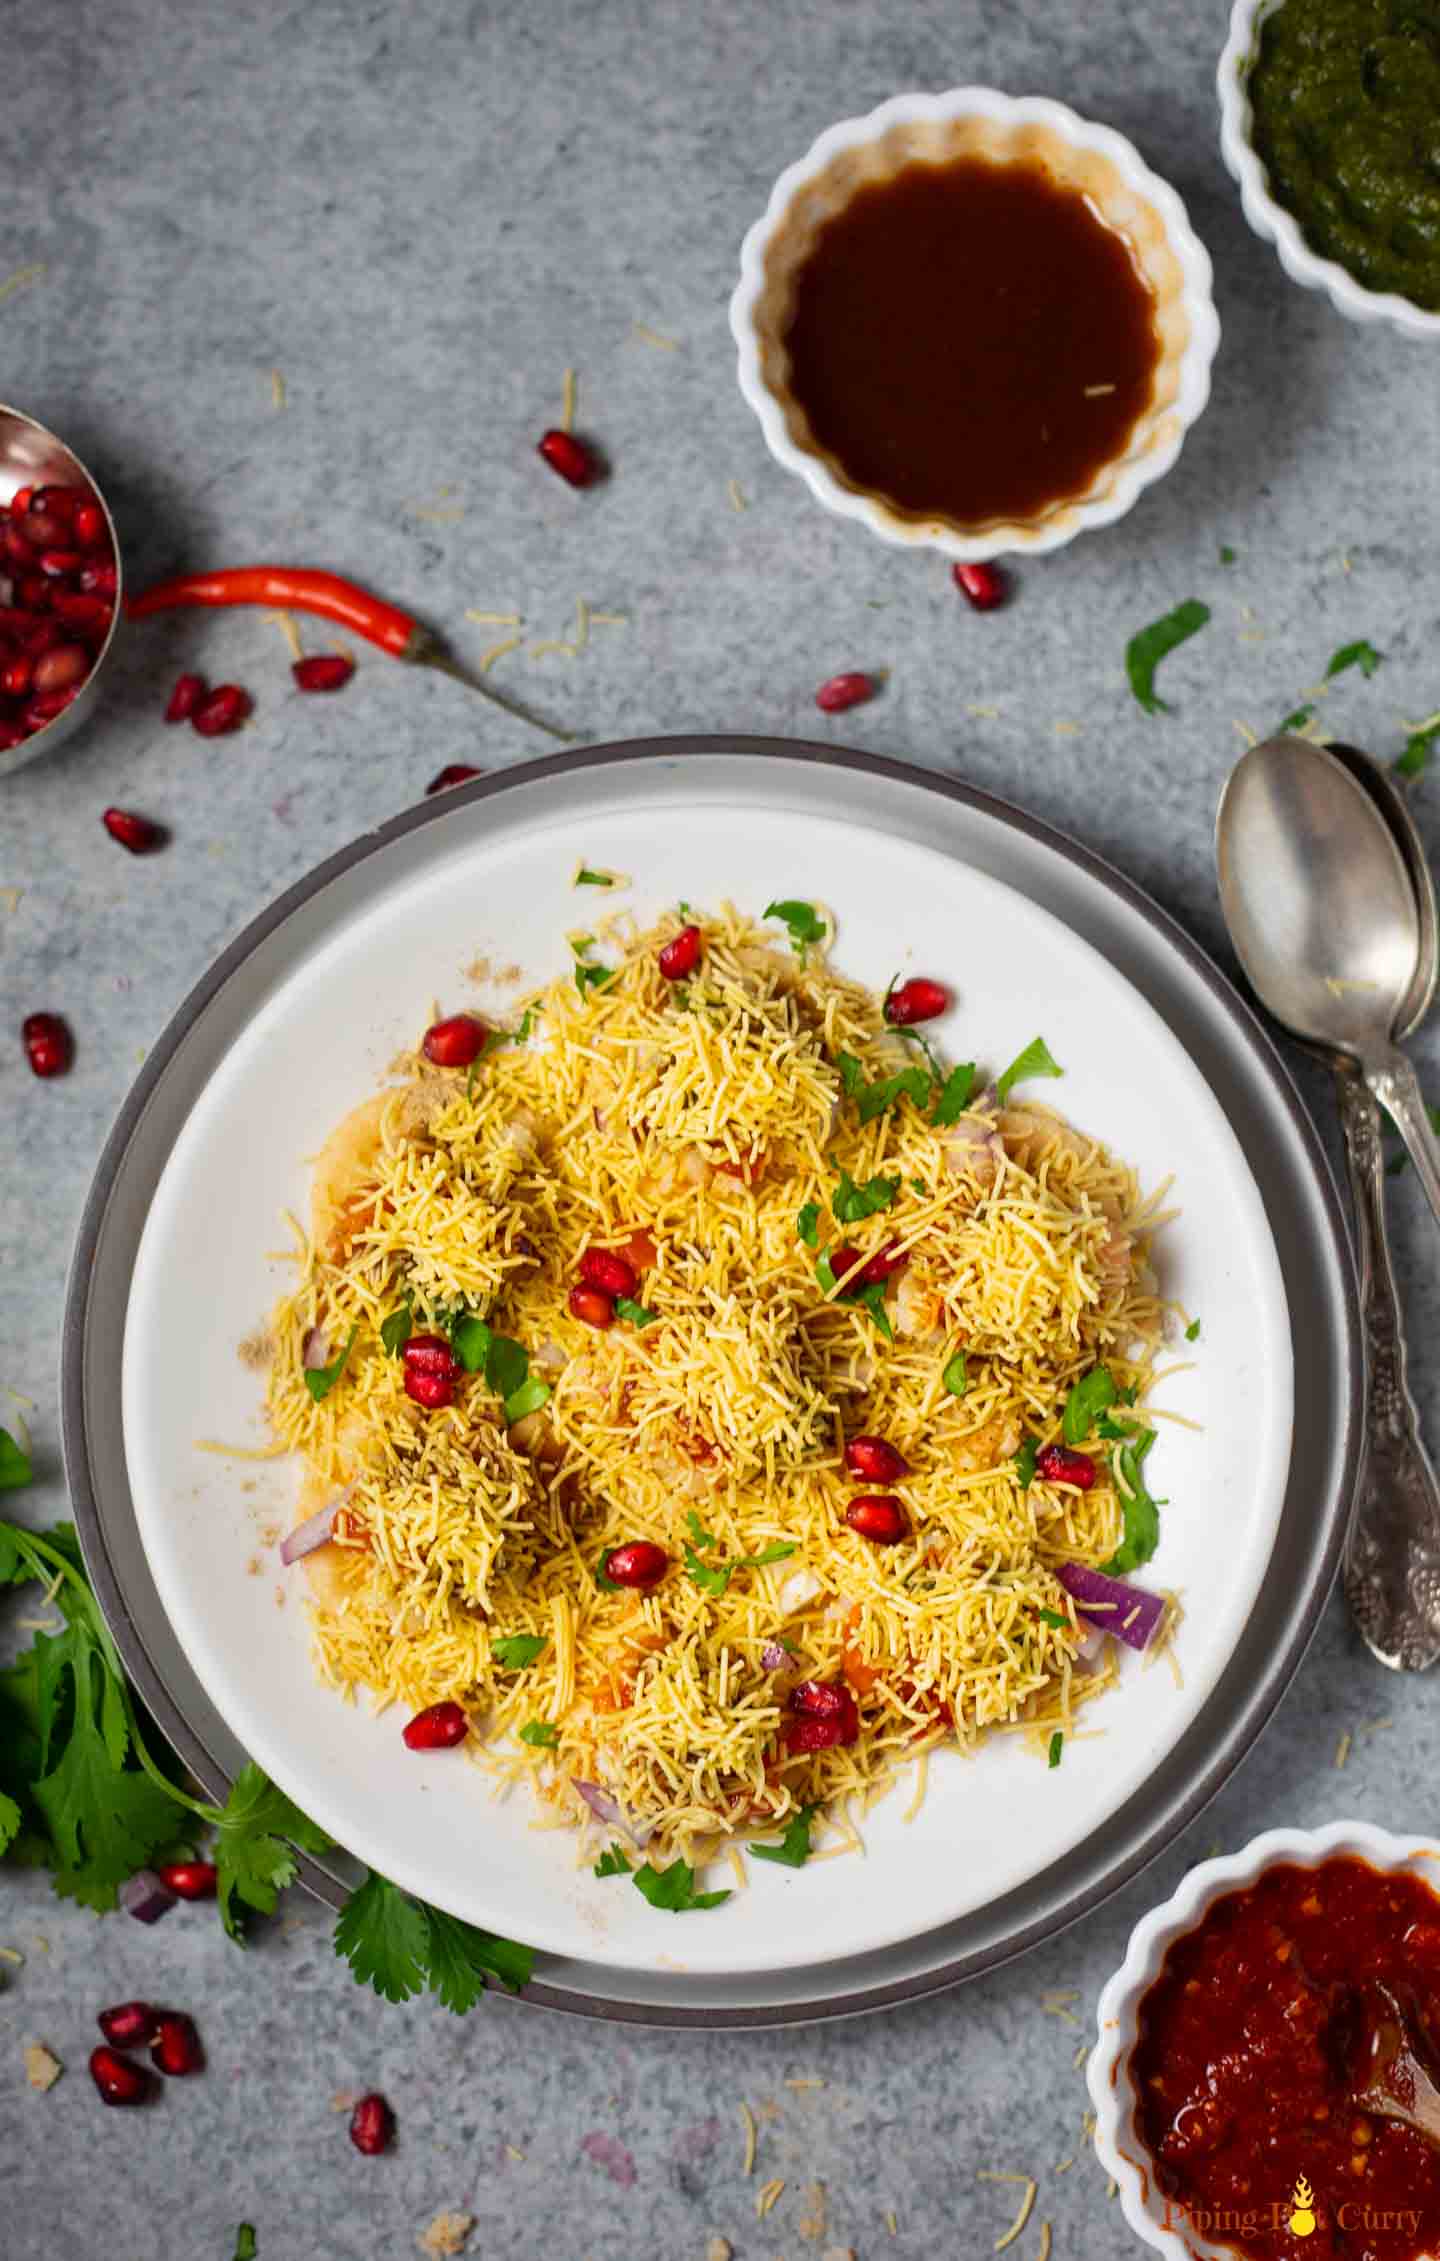 Sev Puri garnished with pomegranate seeds and cilantro served in a plate 